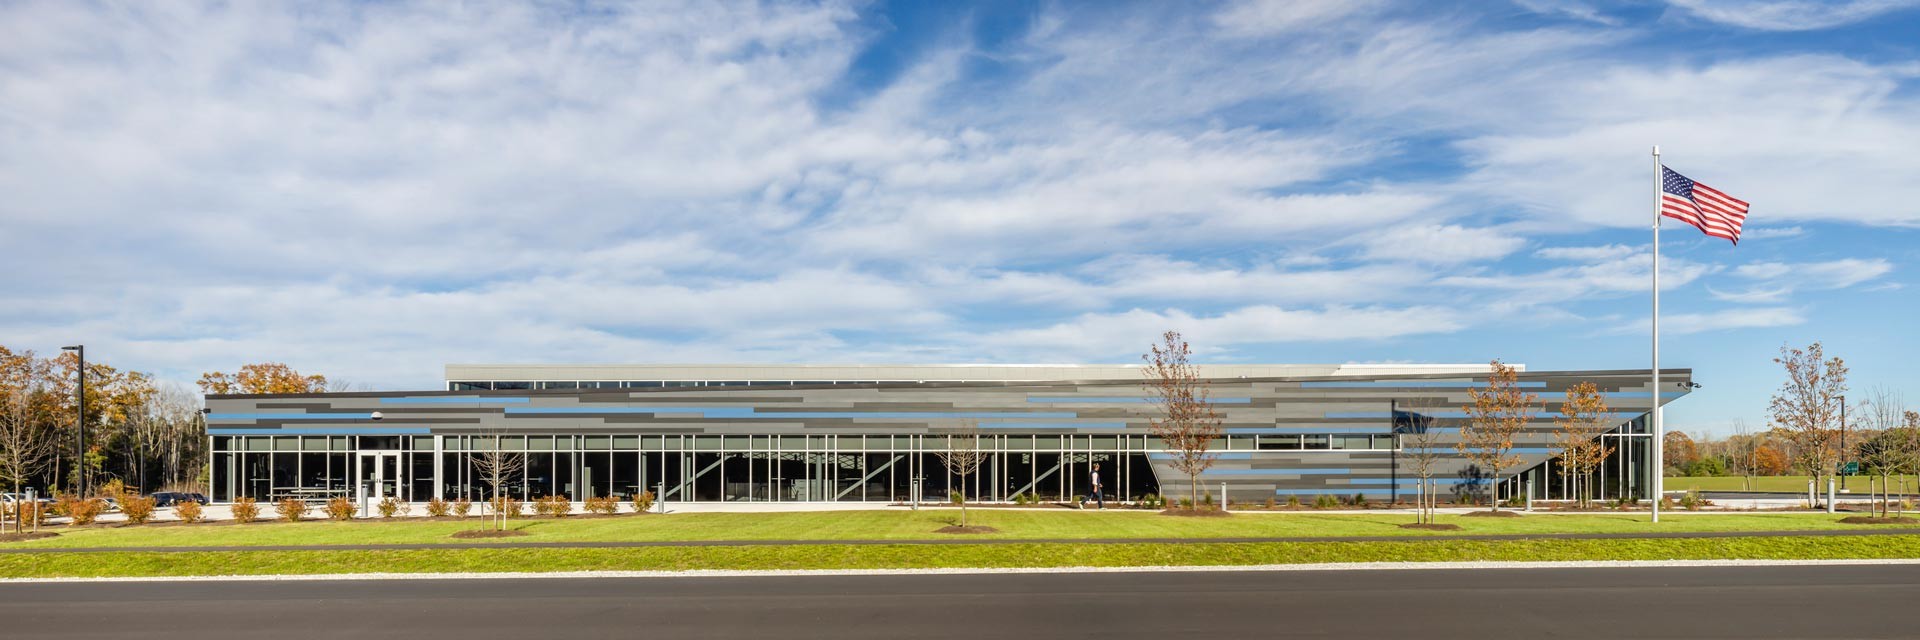 Wide angle view of the new Harvey Performance Center in Maine